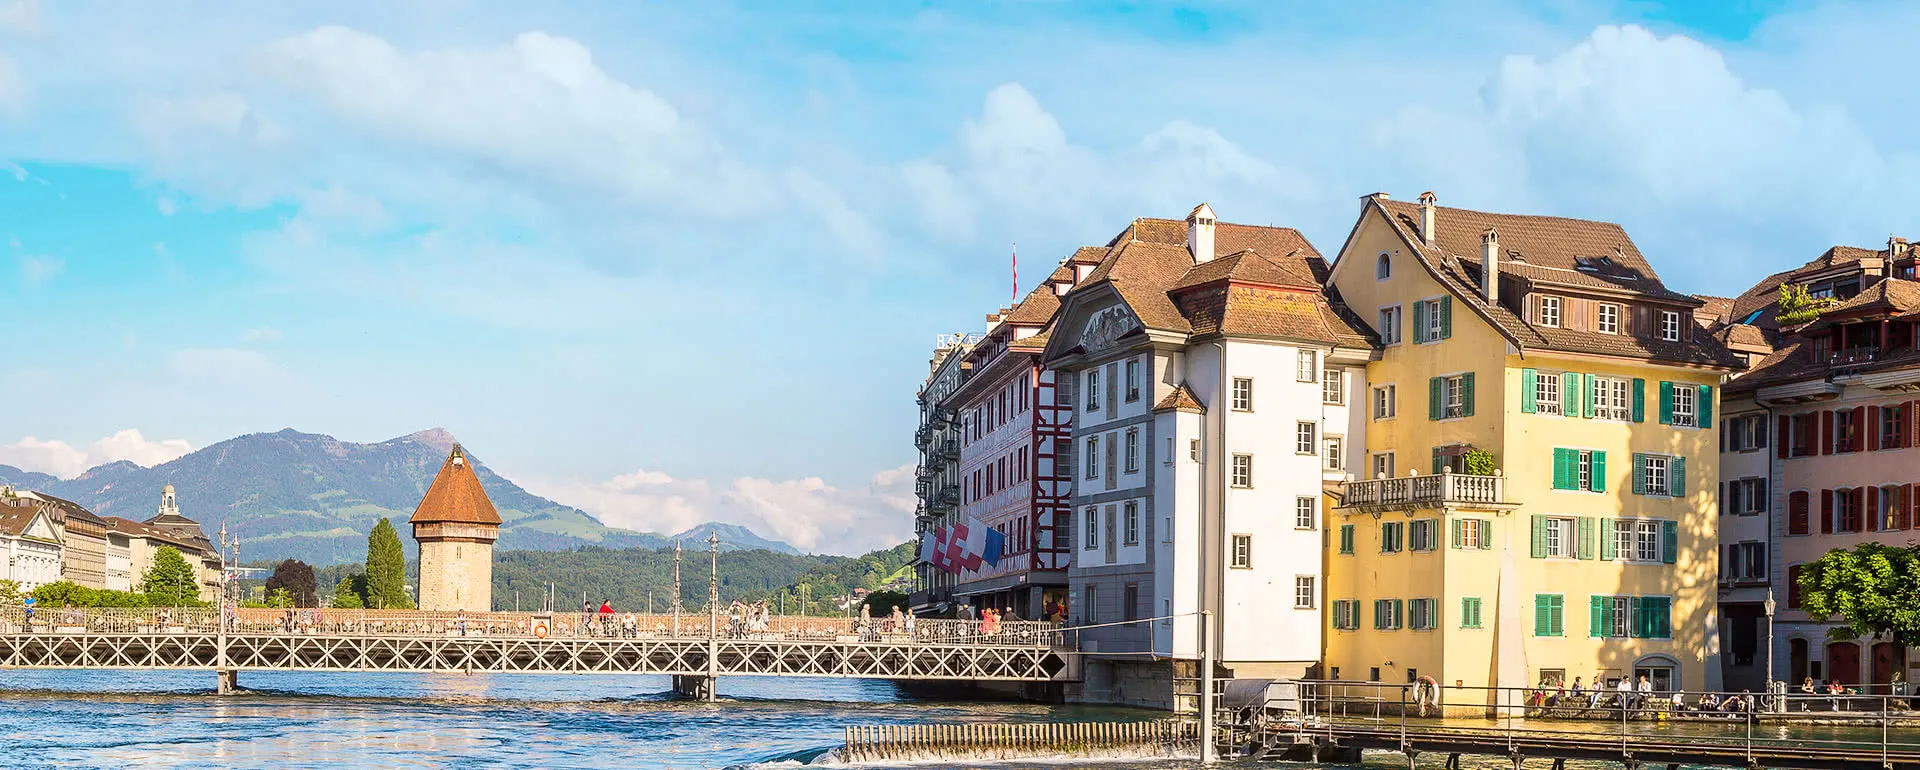 Luzern - the destination with youth hostels